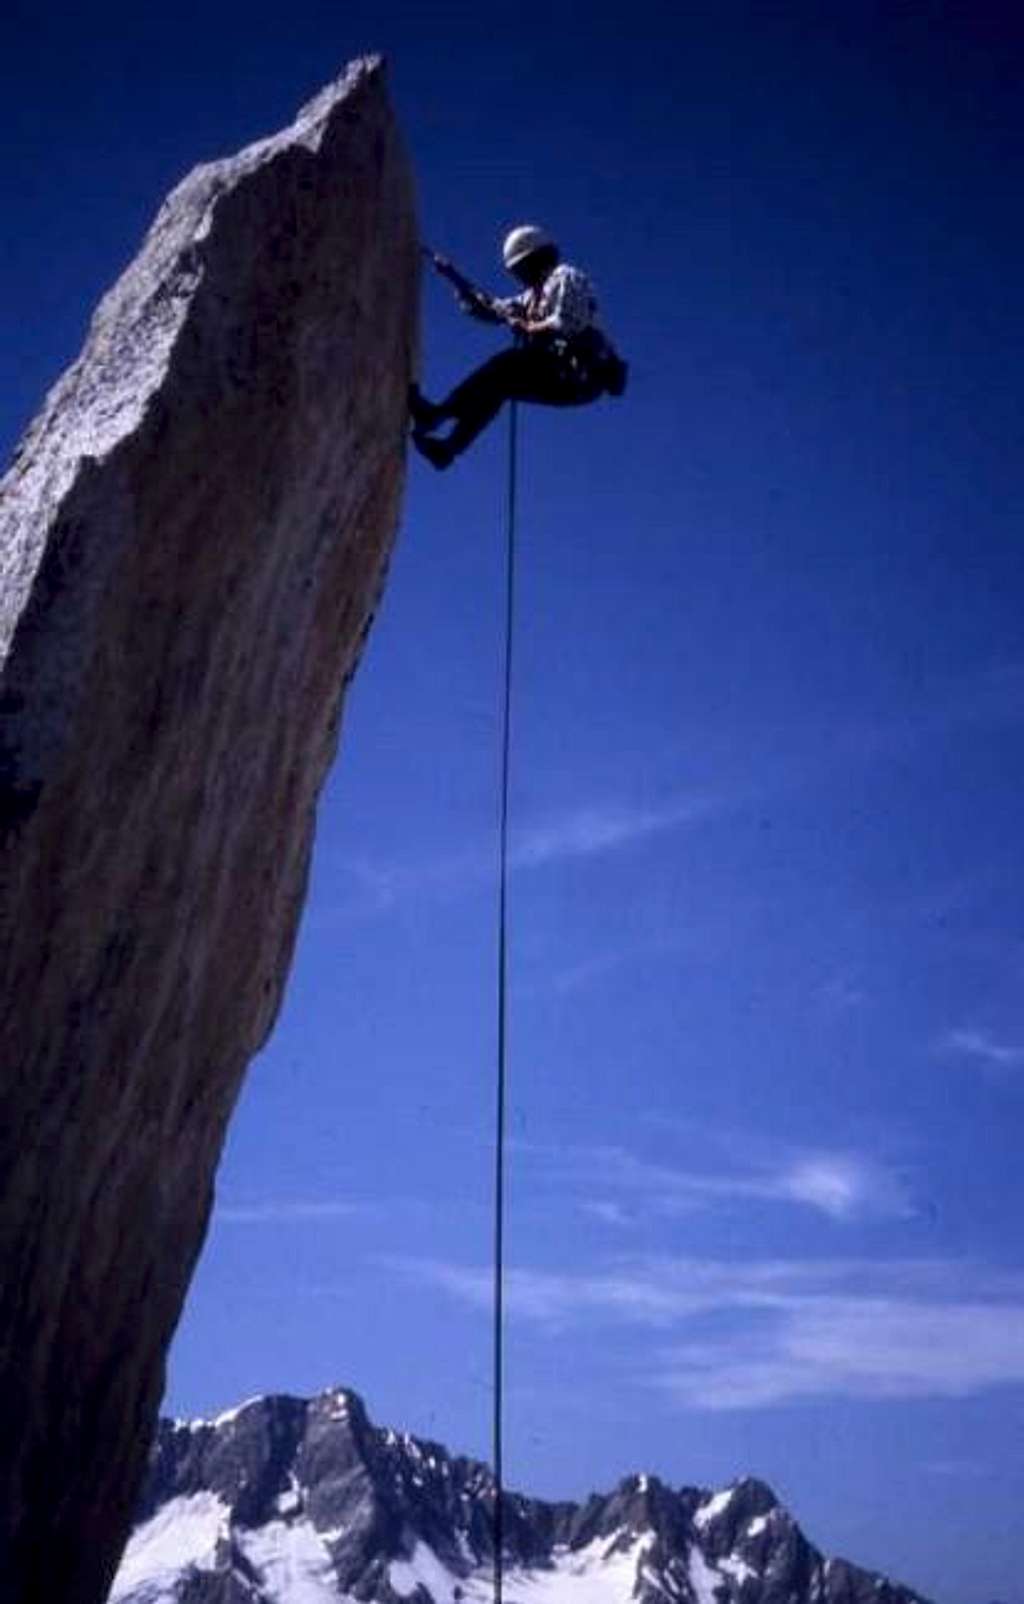 Rapelling from the summit...